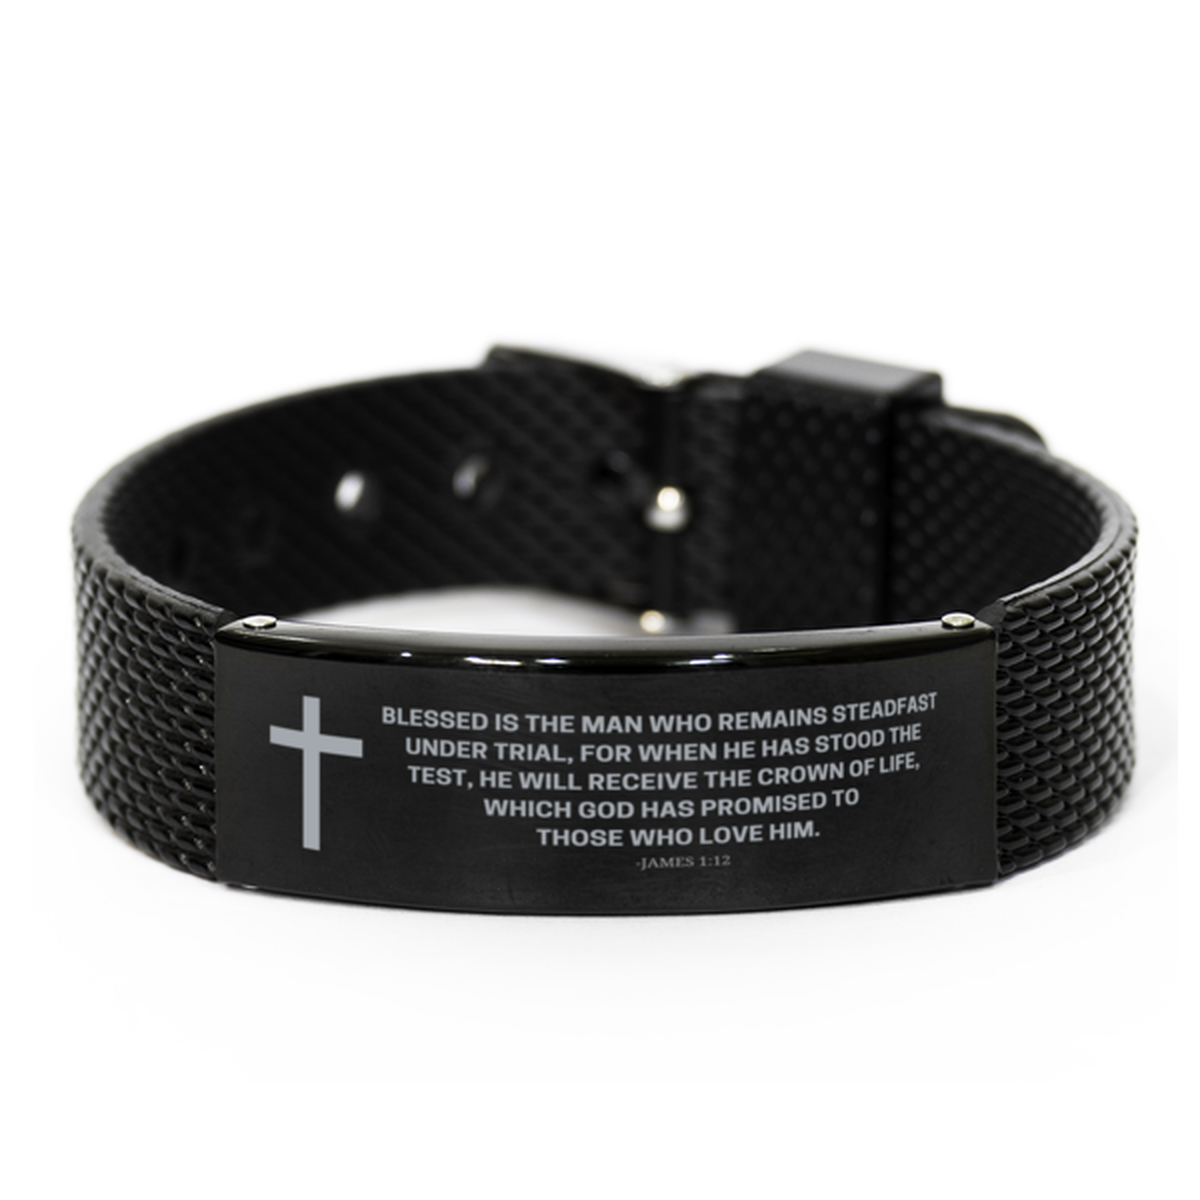 Baptism Gifts For Teenage Boys Girls, Christian Bible Verse Black Shark Mesh Bracelet, Blessed is the man who remains, Catholic Confirmation Gifts for Son, Godson, Grandson, Nephew